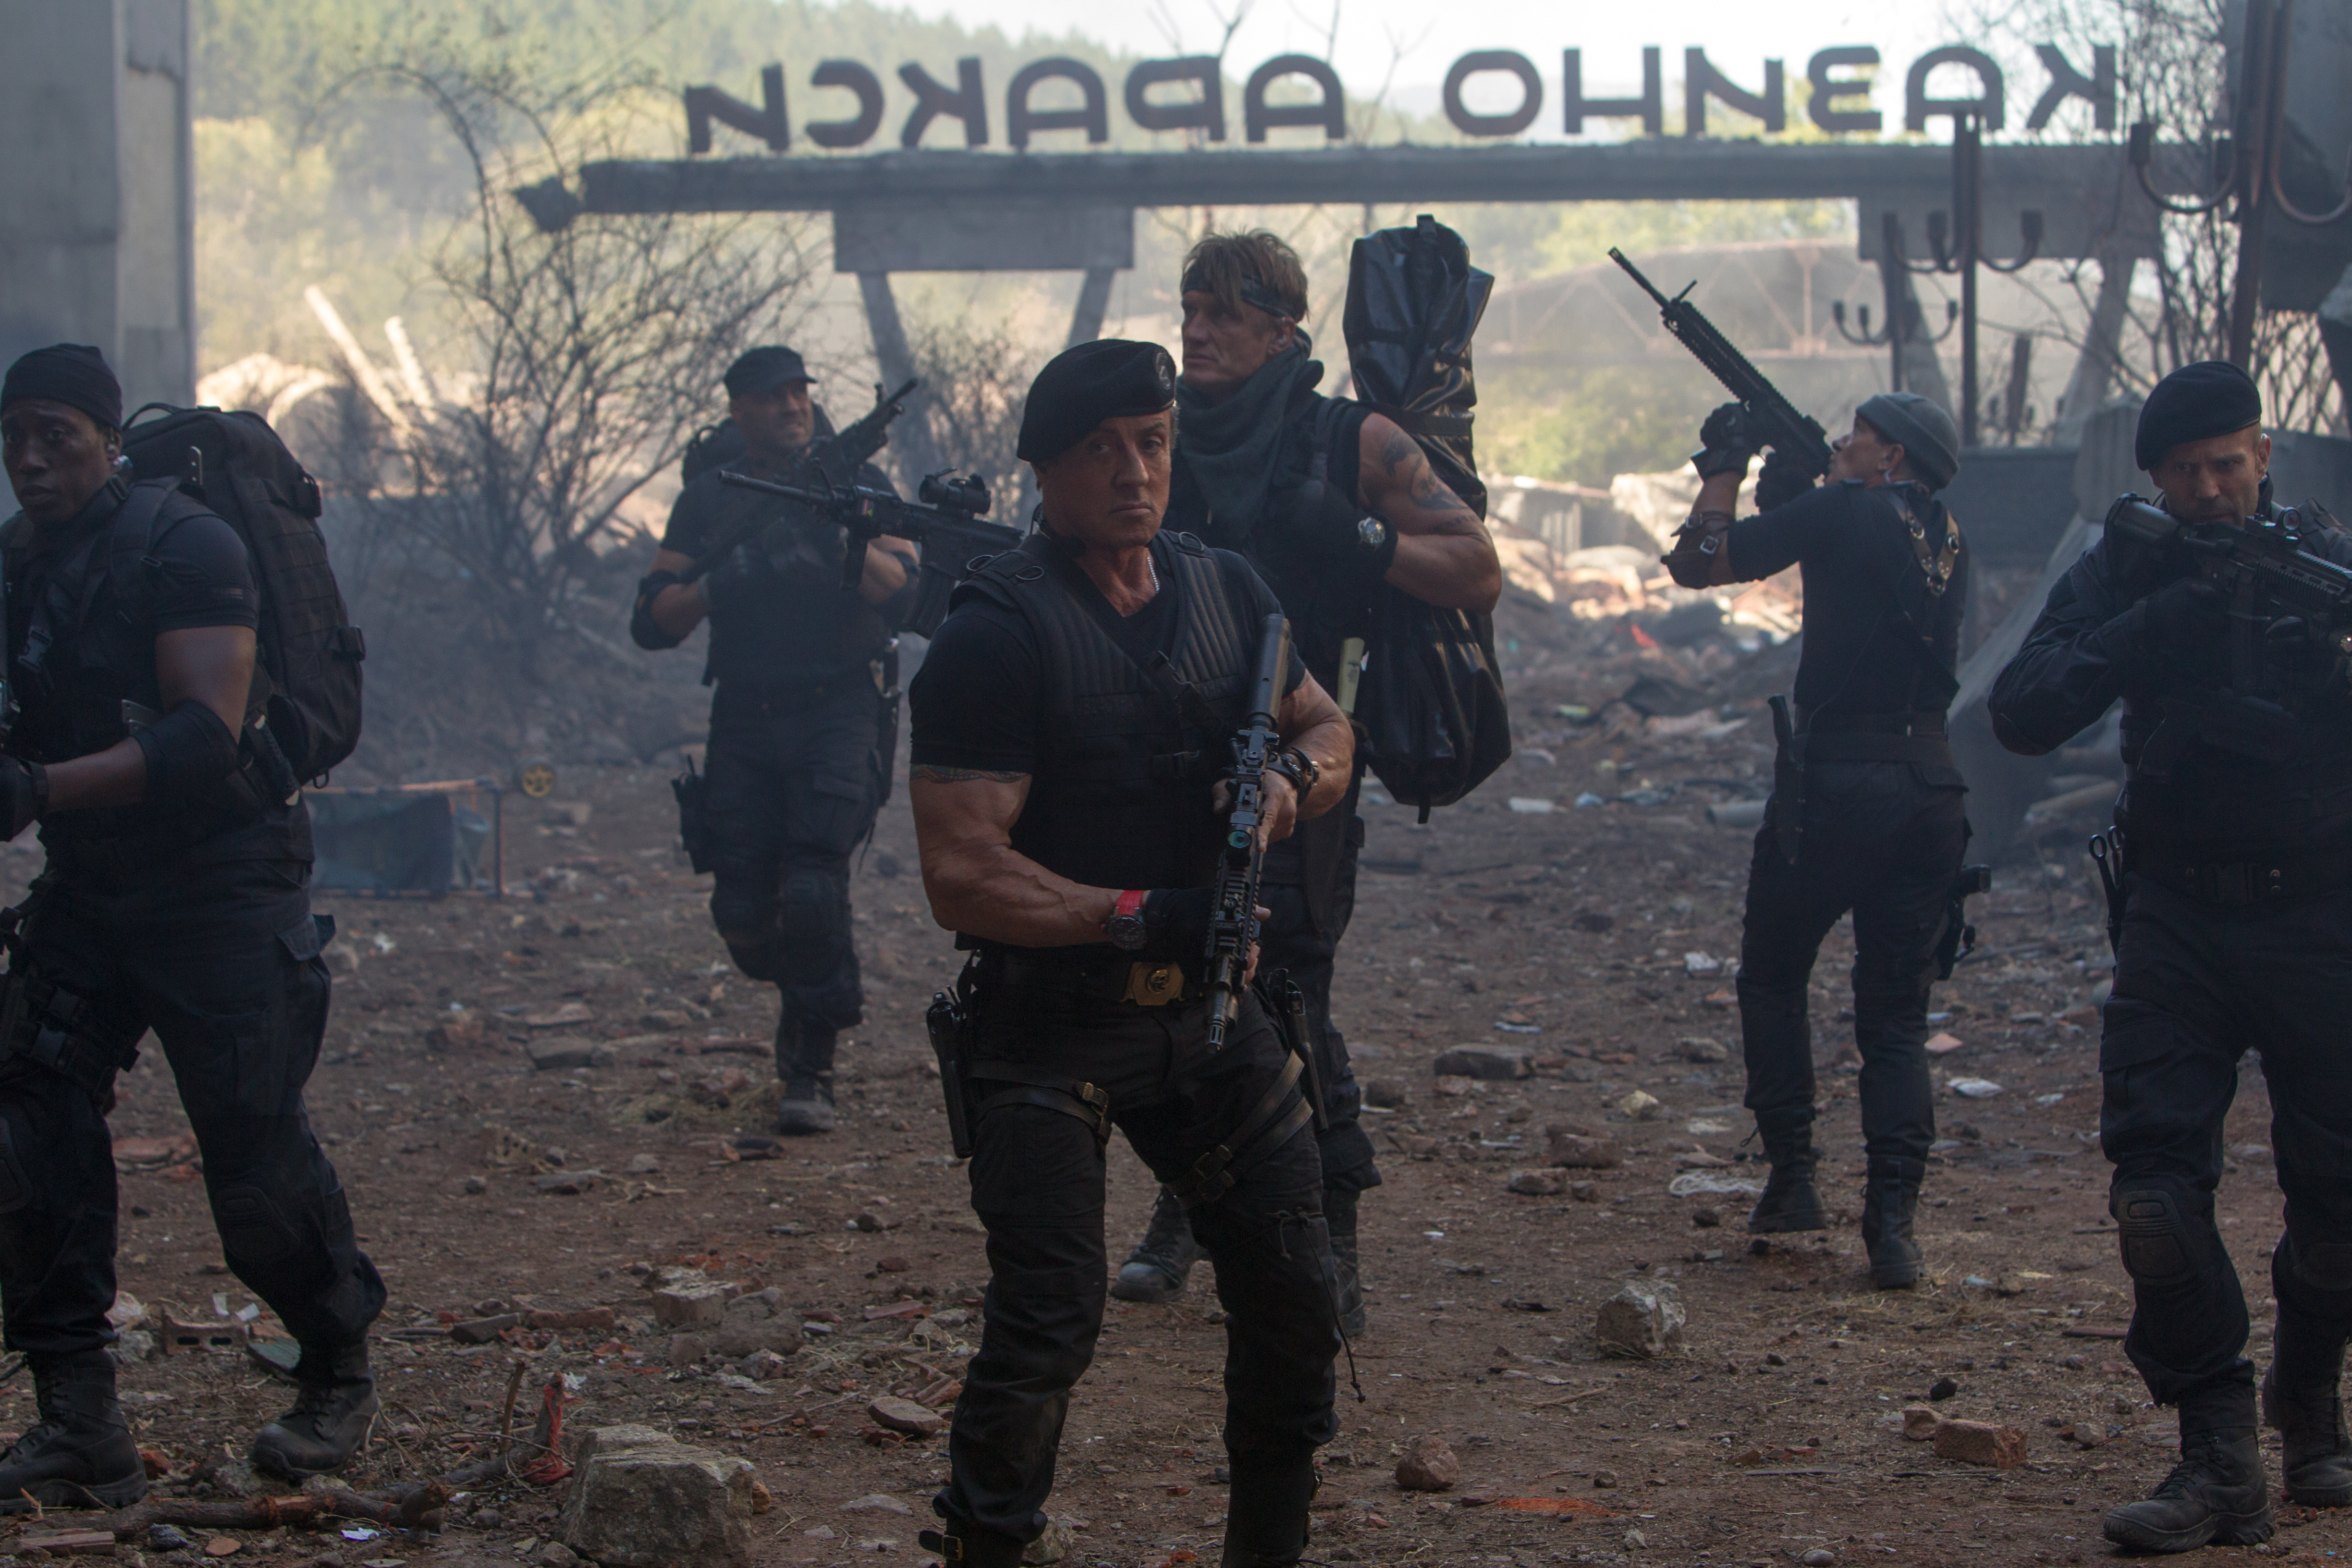 movie, the expendables 3, antonio banderas, barney ross, doc (the expendables), dolph lundgren, galgo (the expendables), gunnar jensen, jason statham, lee christmas, randy couture, sylvester stallone, toll road, wesley snipes, the expendables UHD